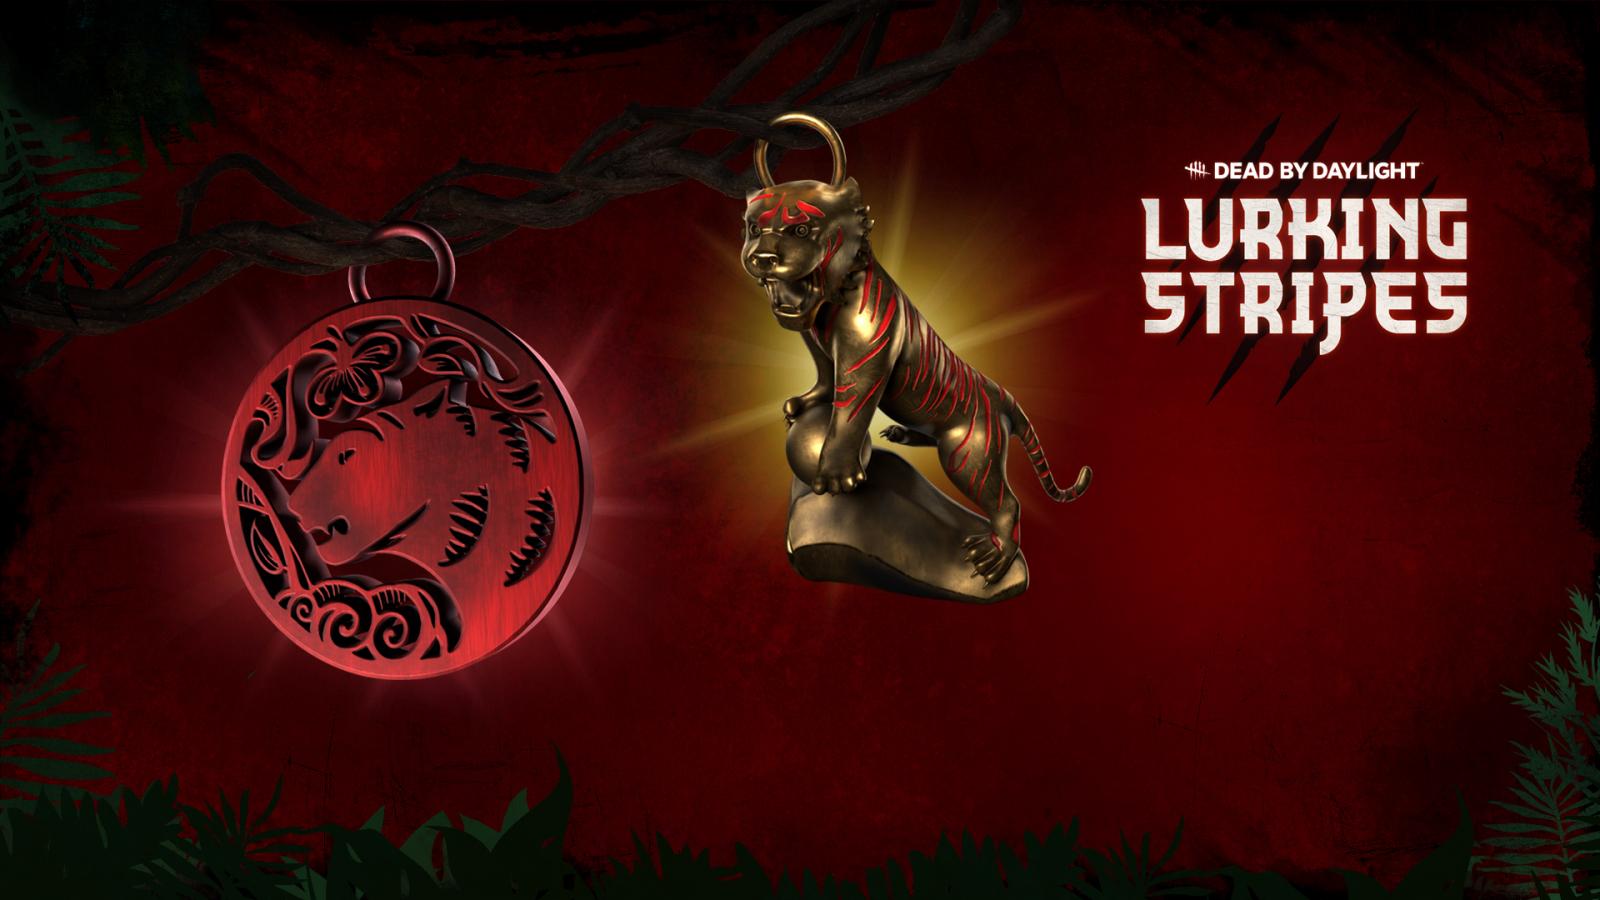 An image of the two unlockable Lurking Stripes charms